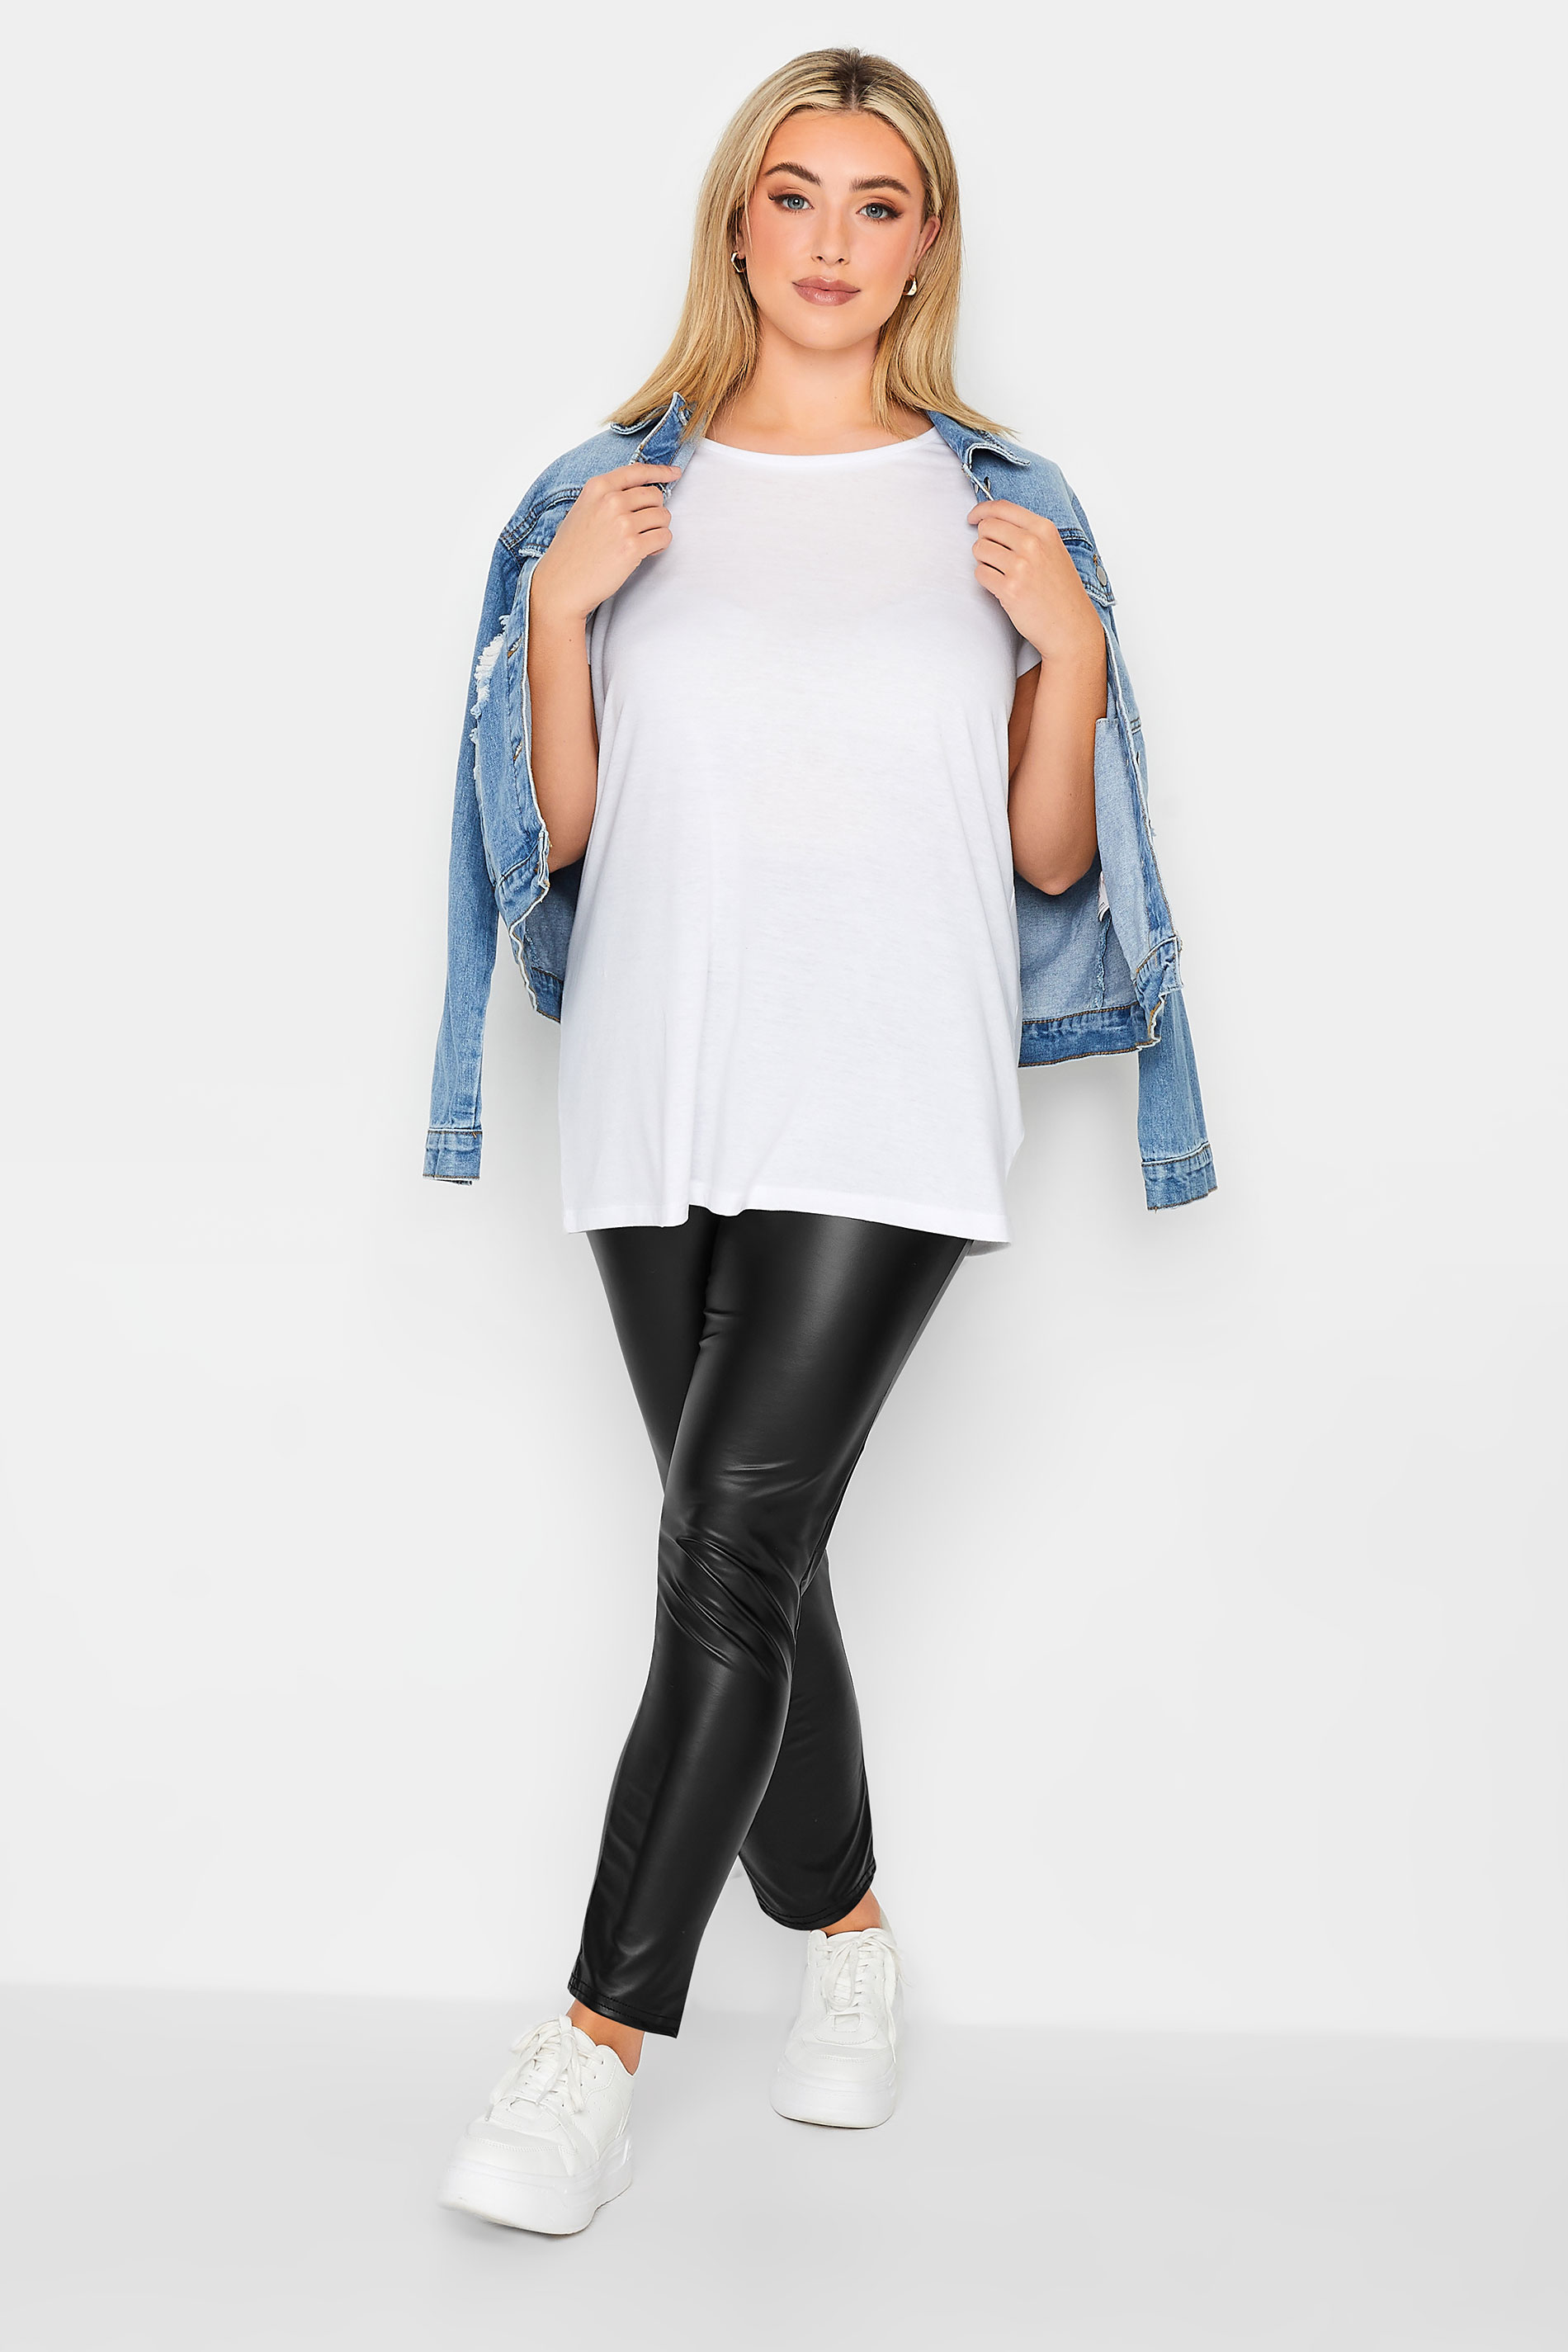 YOURS PETITE Plus Size Black Stretch Leather Look Leggings | Yours Clothing 2